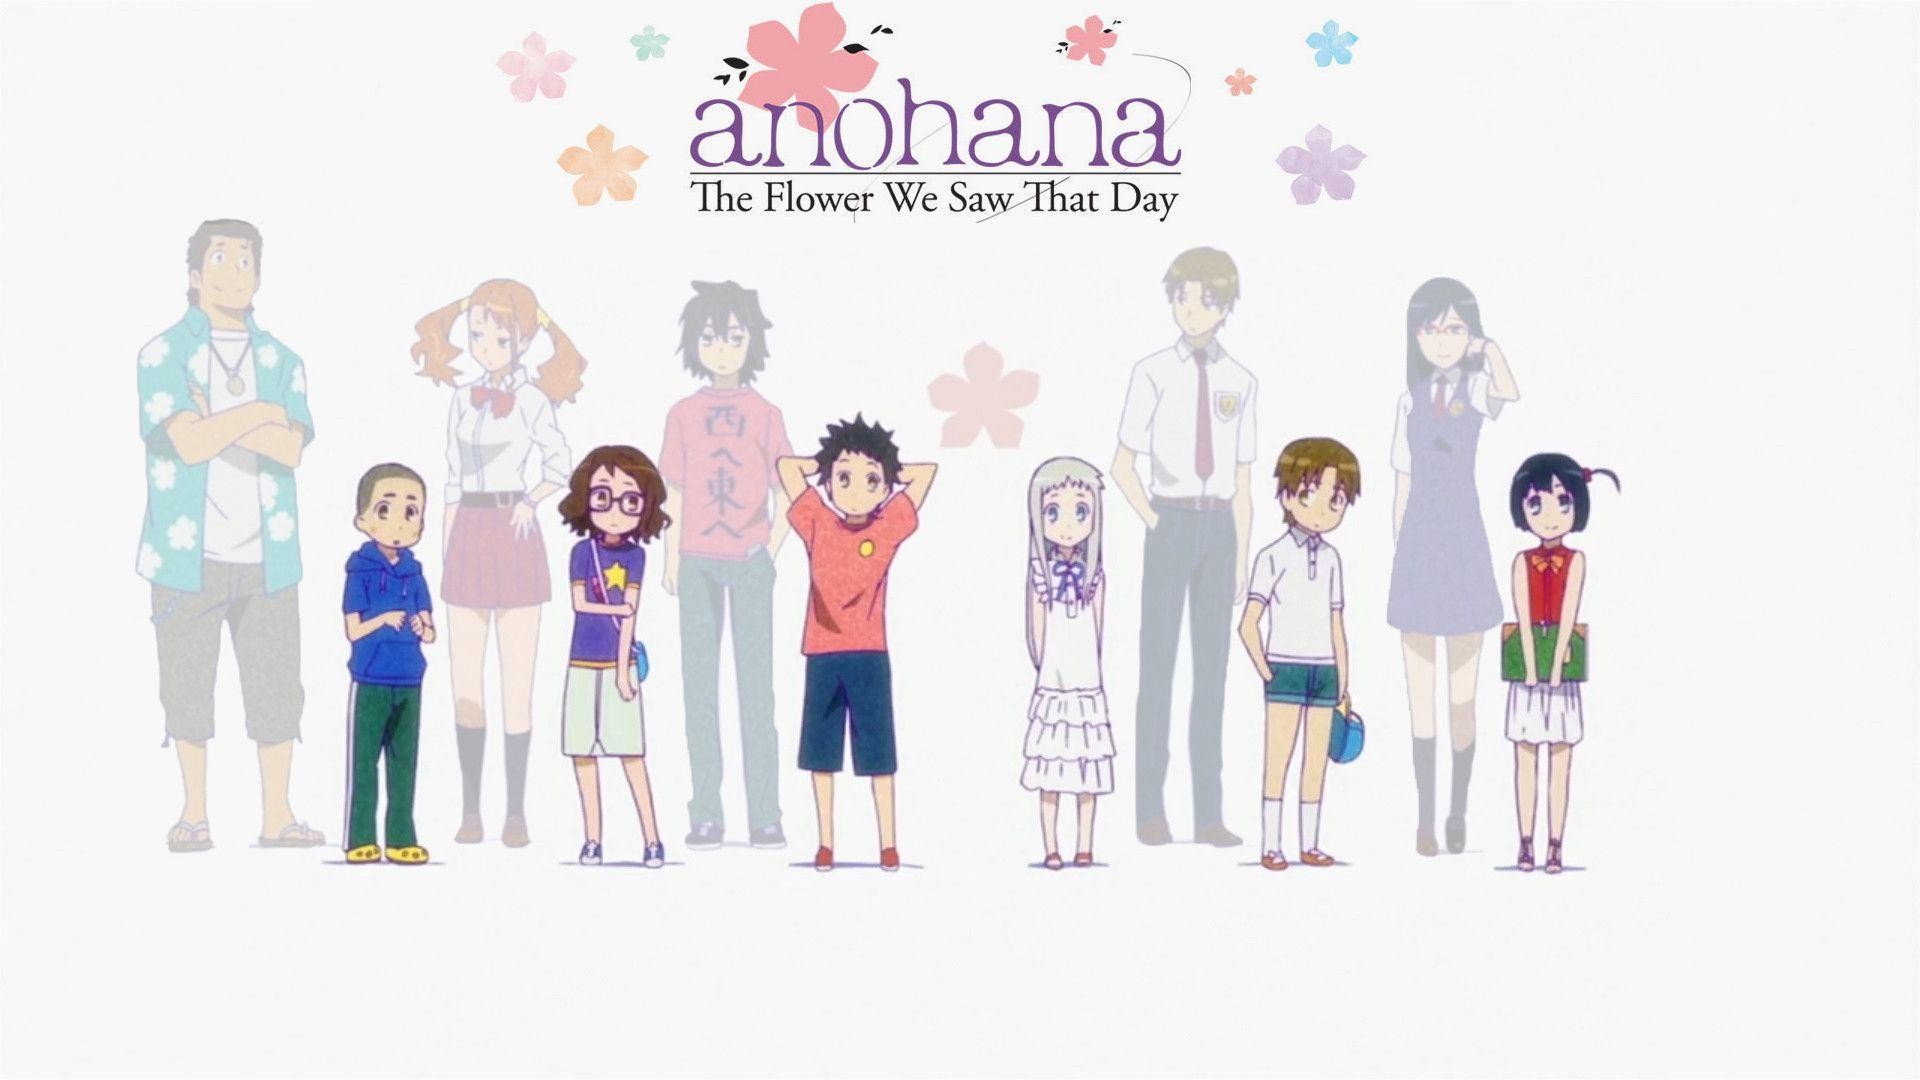 1920x1080 Anohana The Flower We Saw That Day Wallpapers - WallpaperVortex.com